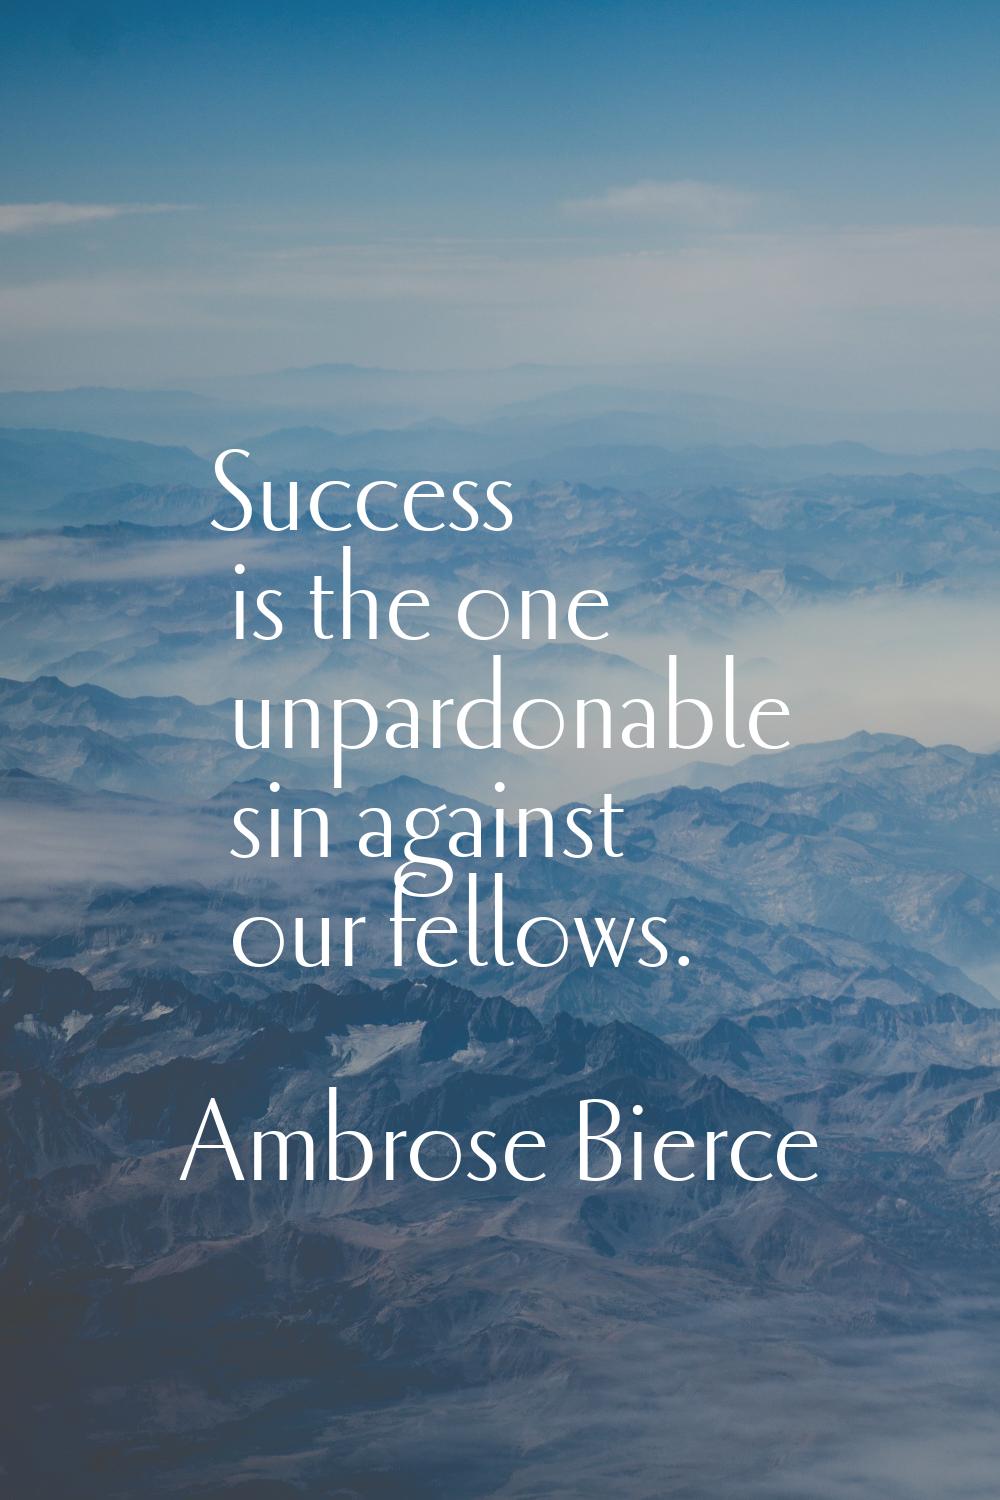 Success is the one unpardonable sin against our fellows.